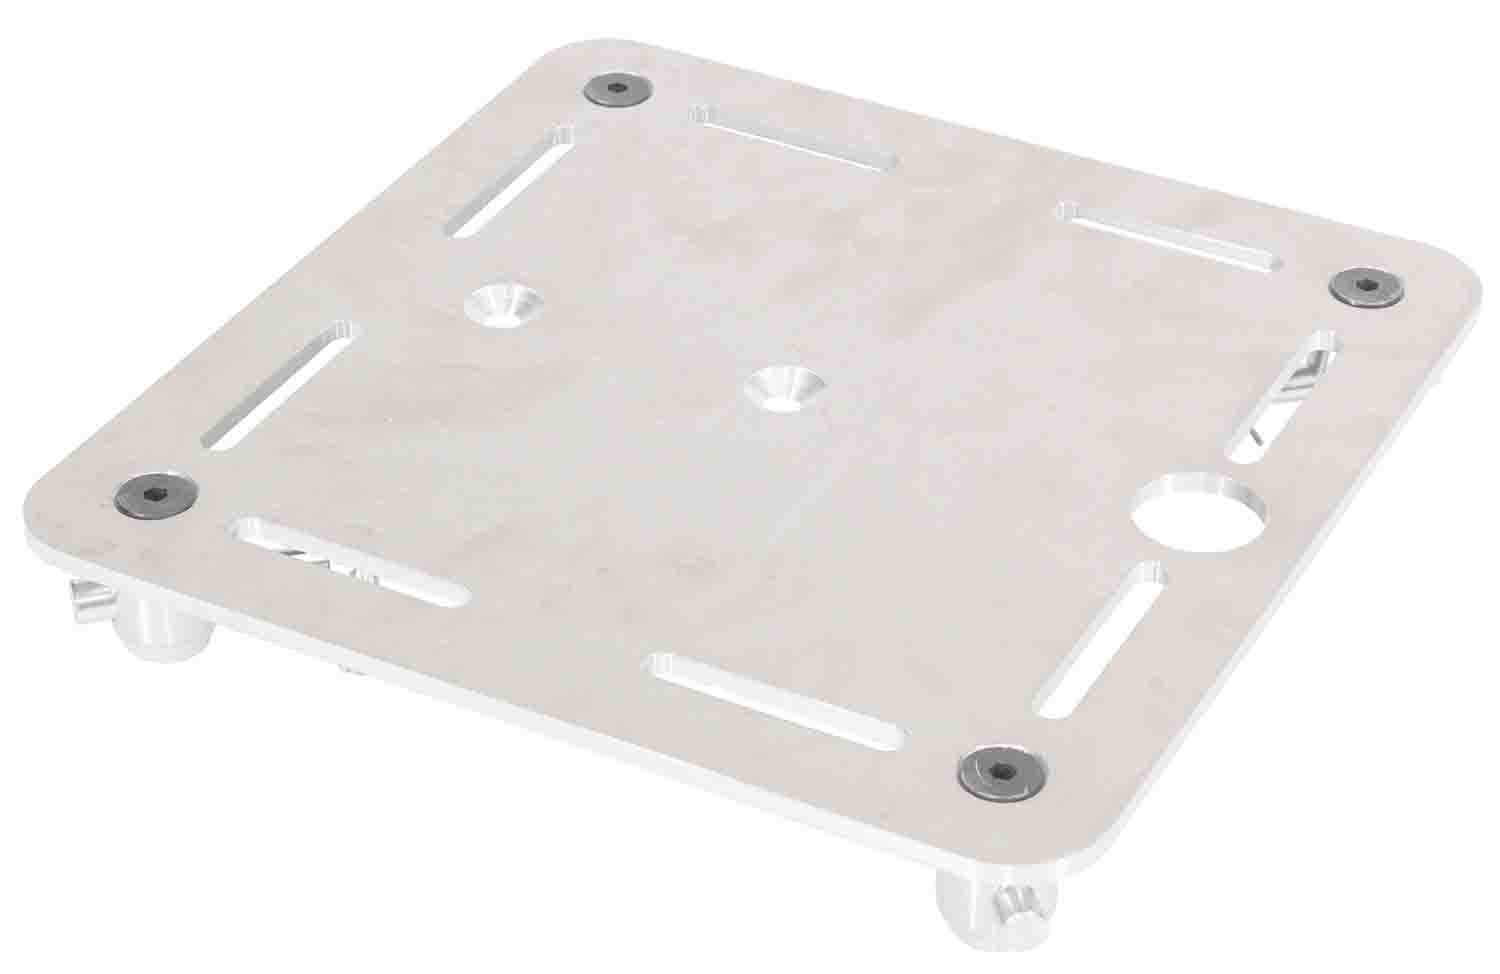 B-Stock: ProX XT-BP12A 12" x 12" F34 8mm Aluminum Top Plate with Slots and Mounting Holes for Totems by ProX Cases